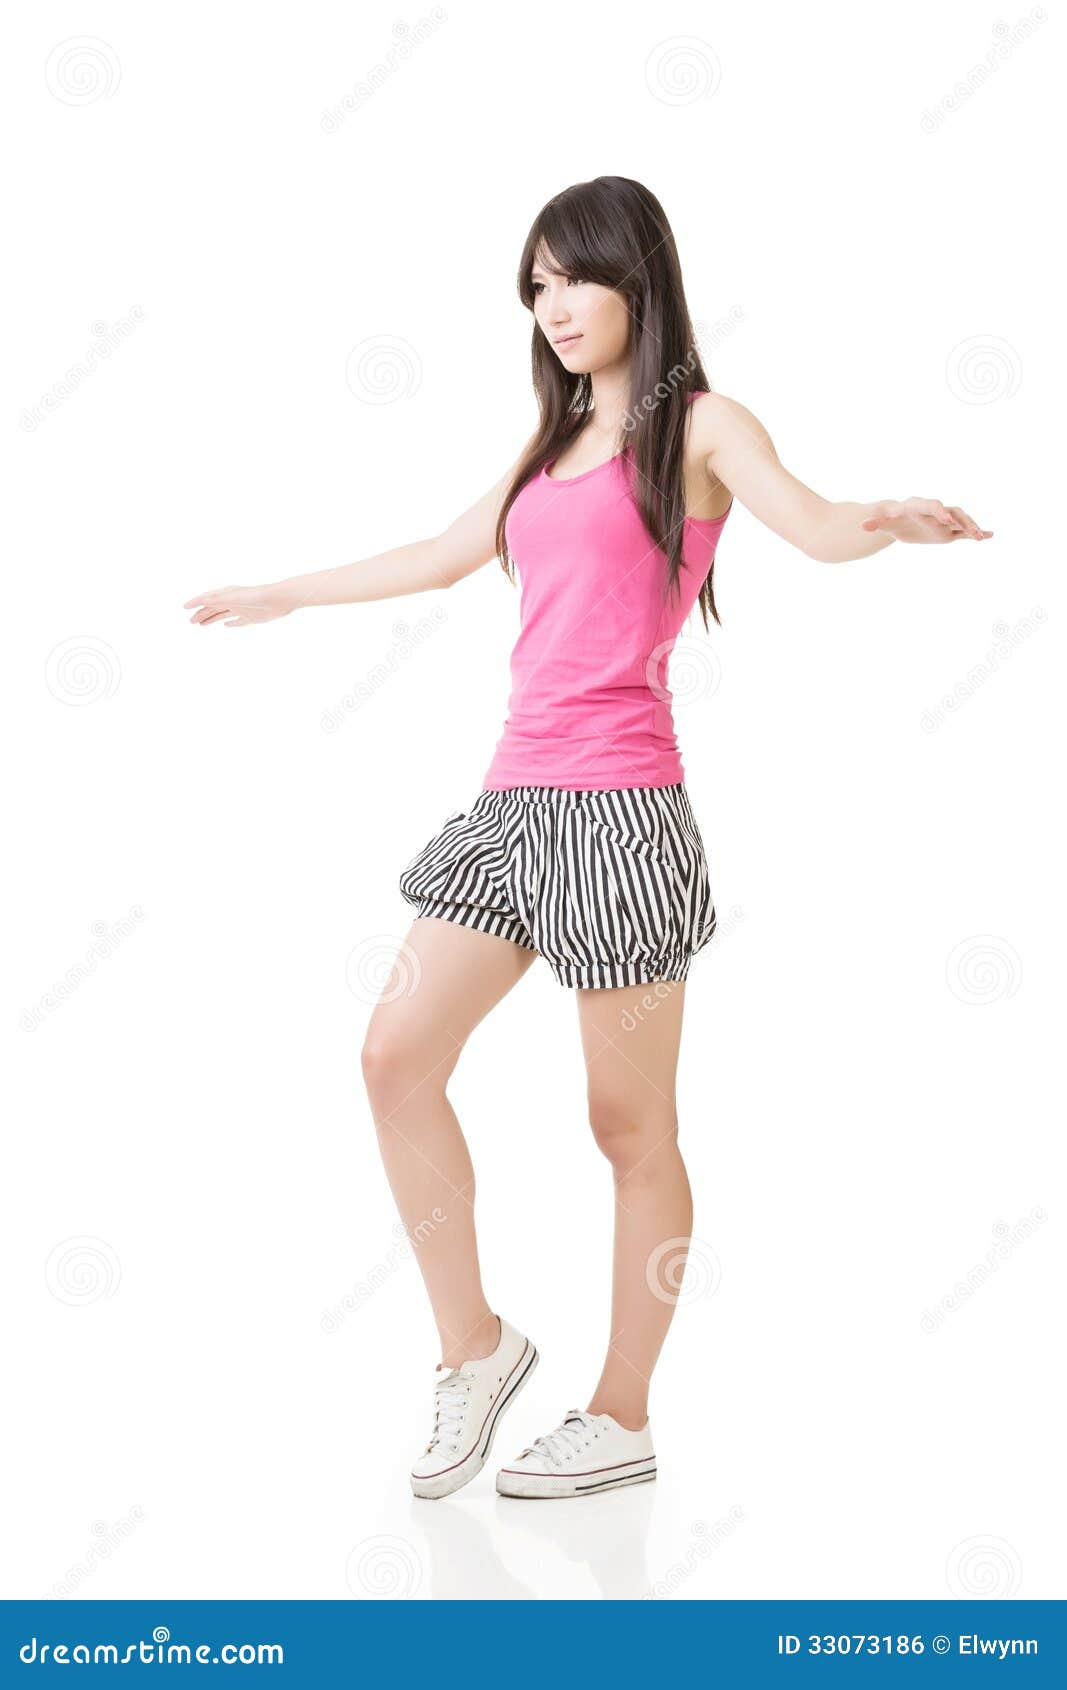 Young Asian Woman Walking on Imaginary Rope Stock Photo - Image of high ...